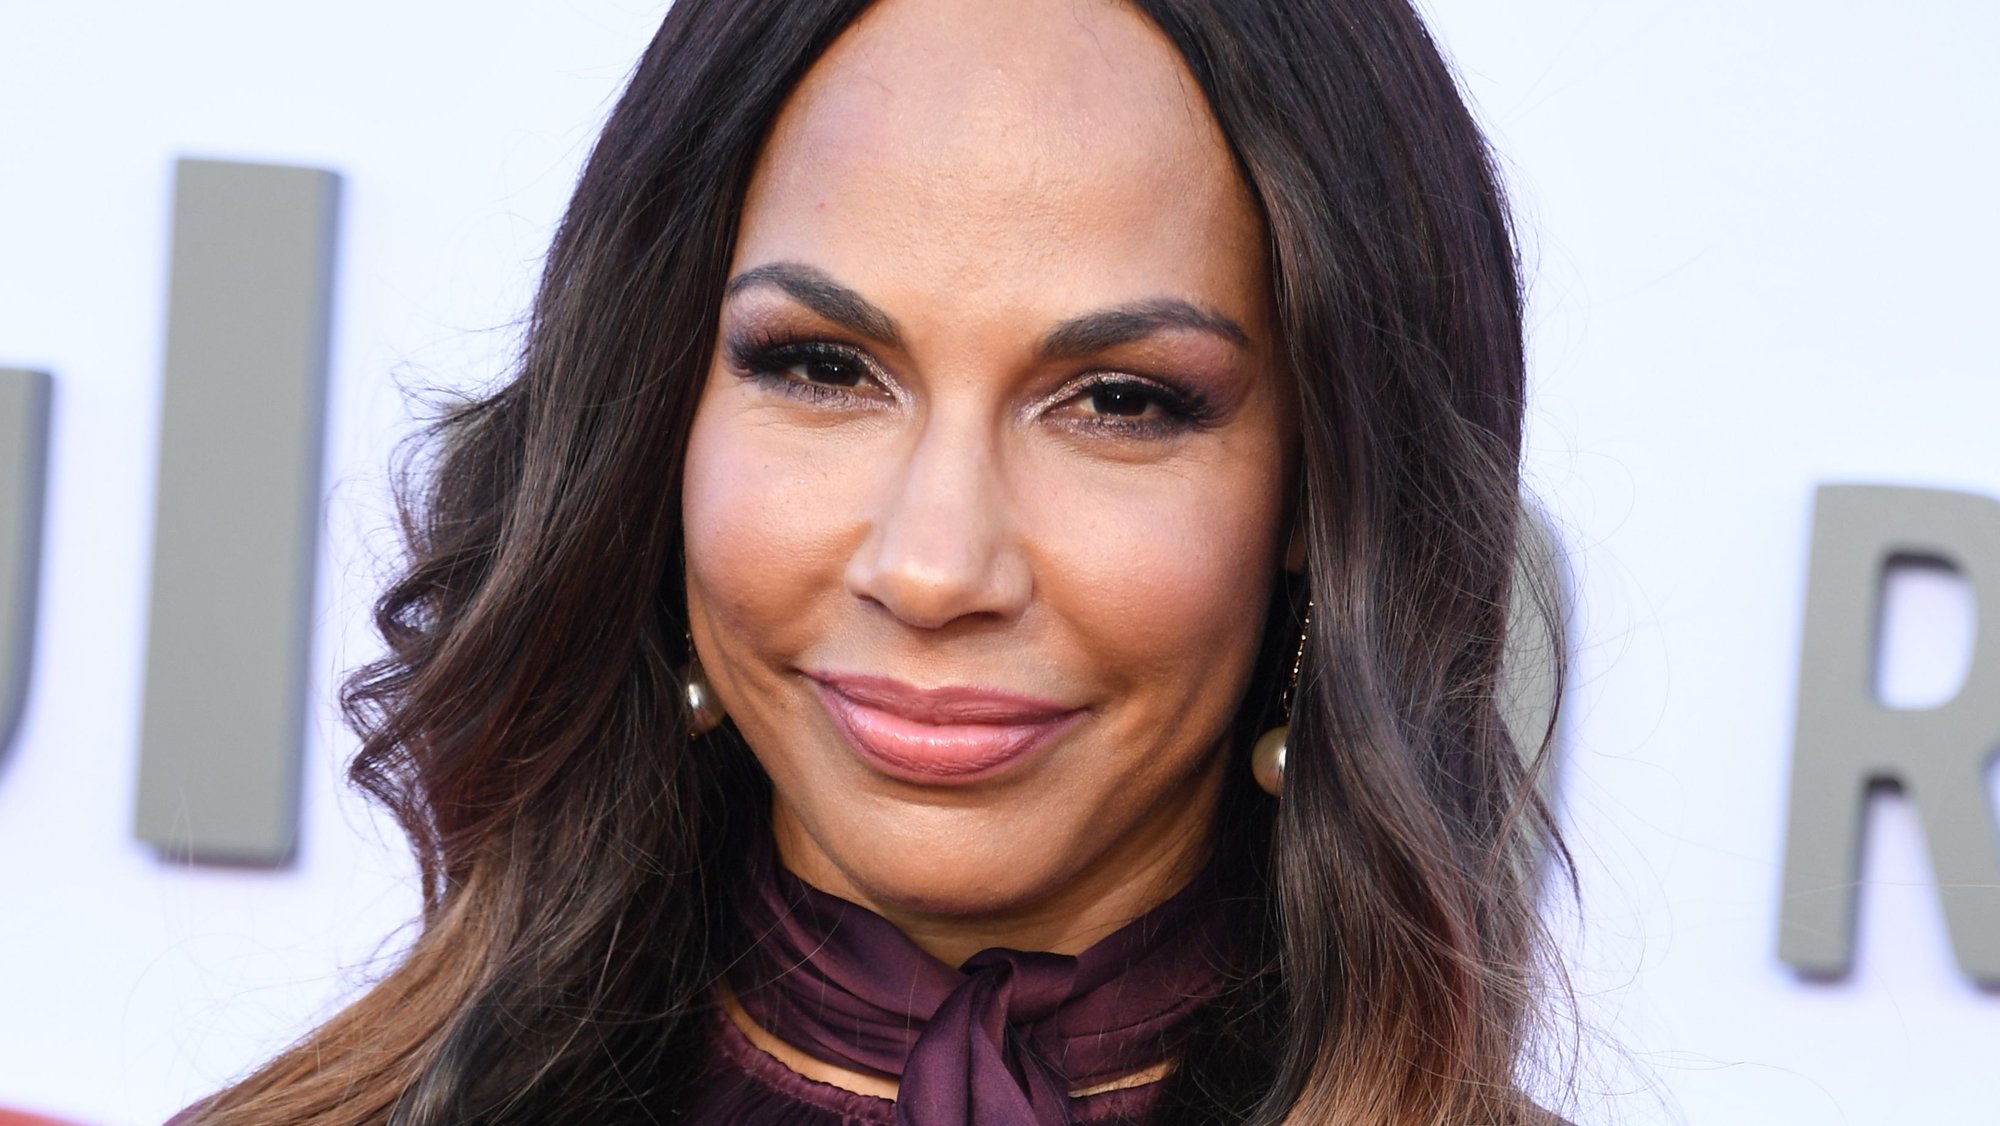 ‘The Handmaid’s Tale’ star Amanda Brugel, who plays Rita, at the season 3 finale celebration at the Regency Village Theatre in Westwood, California on August 6, 2019.